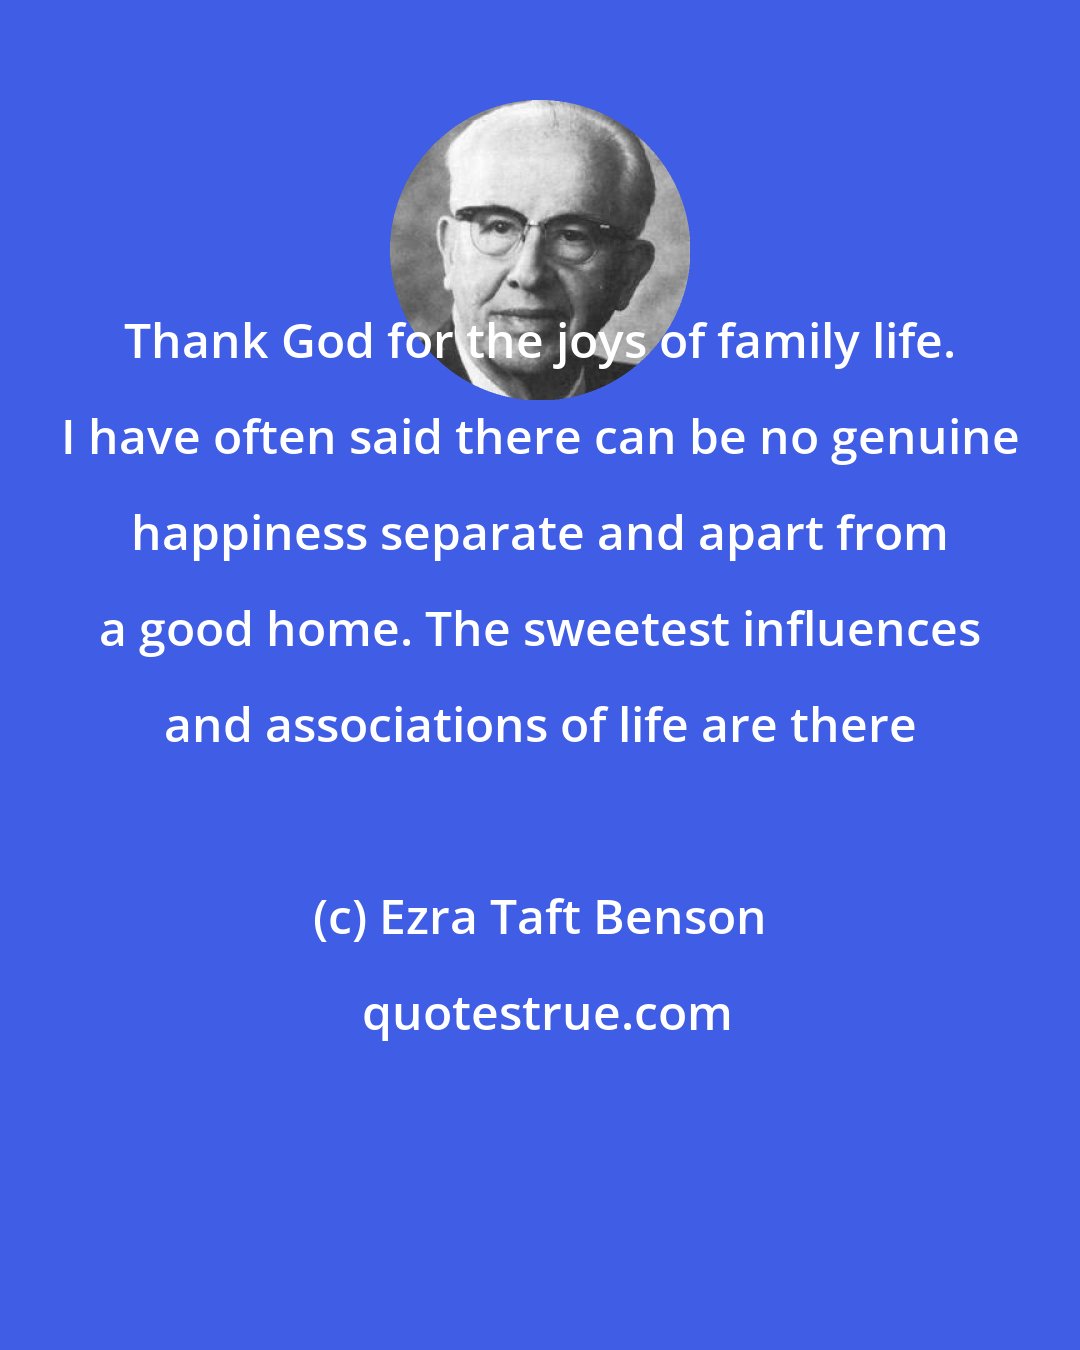 Ezra Taft Benson: Thank God for the joys of family life. I have often said there can be no genuine happiness separate and apart from a good home. The sweetest influences and associations of life are there